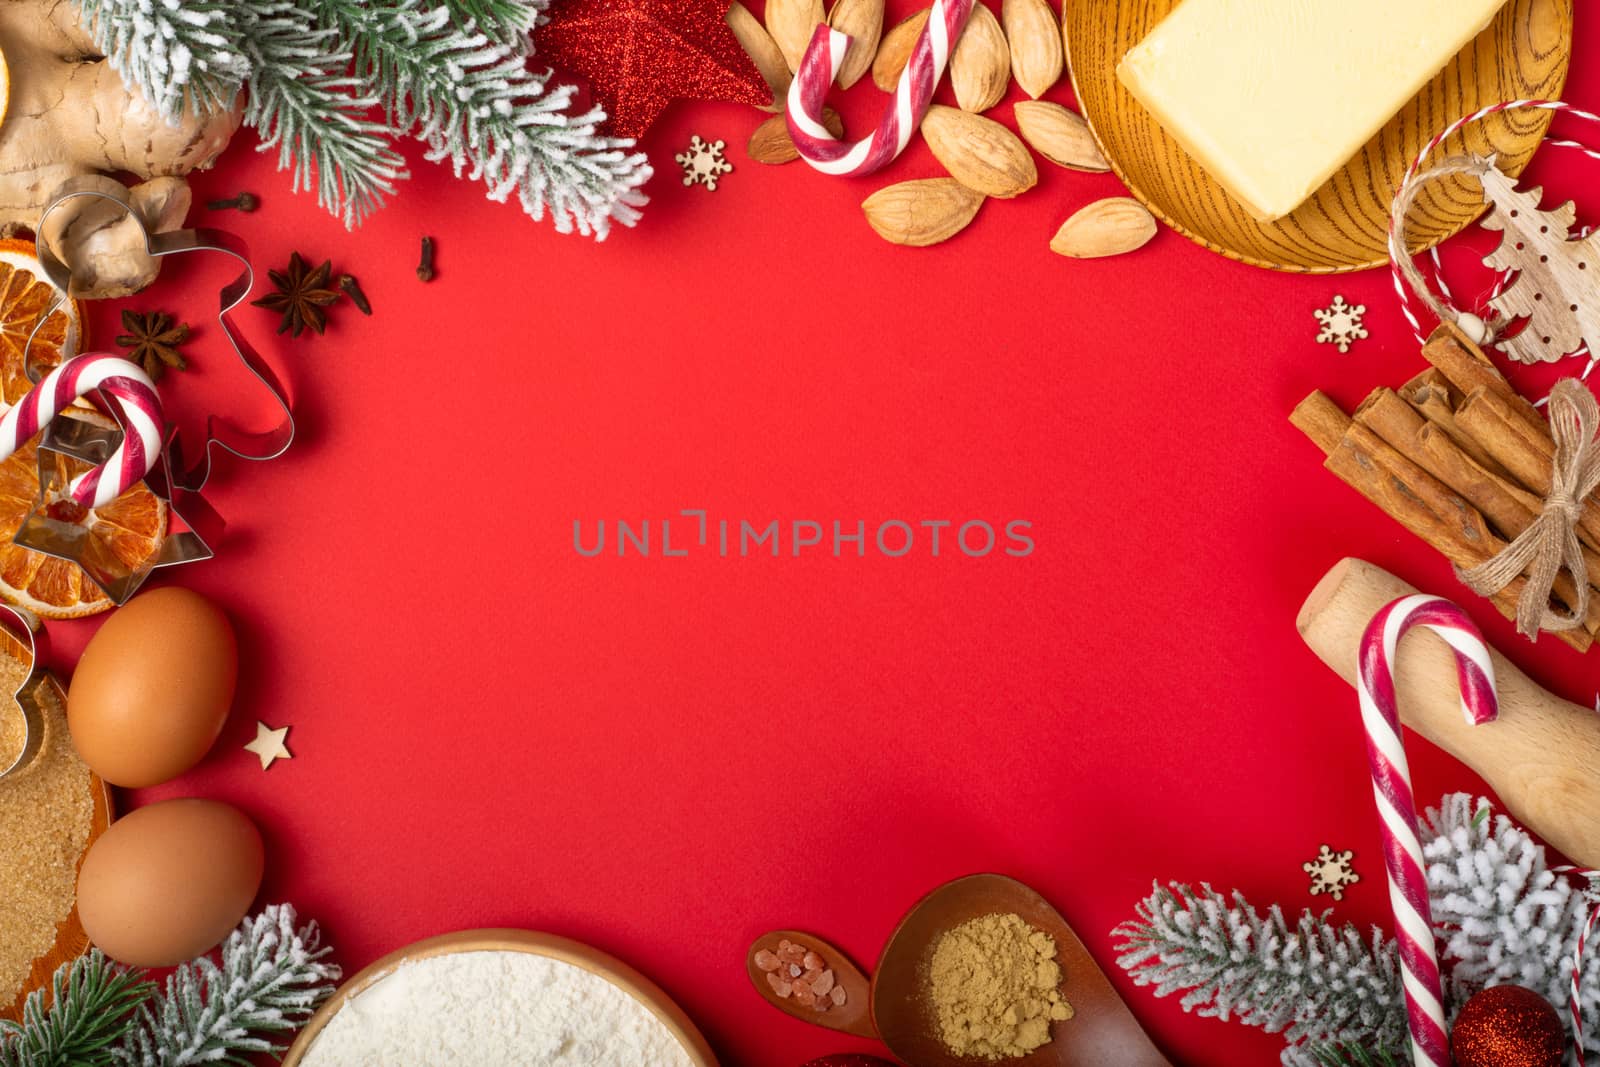 Christmas gingerbread cookies cooking background flat lay top view template with copy space for text. Baking utensils, spices and food ingredients on red paper